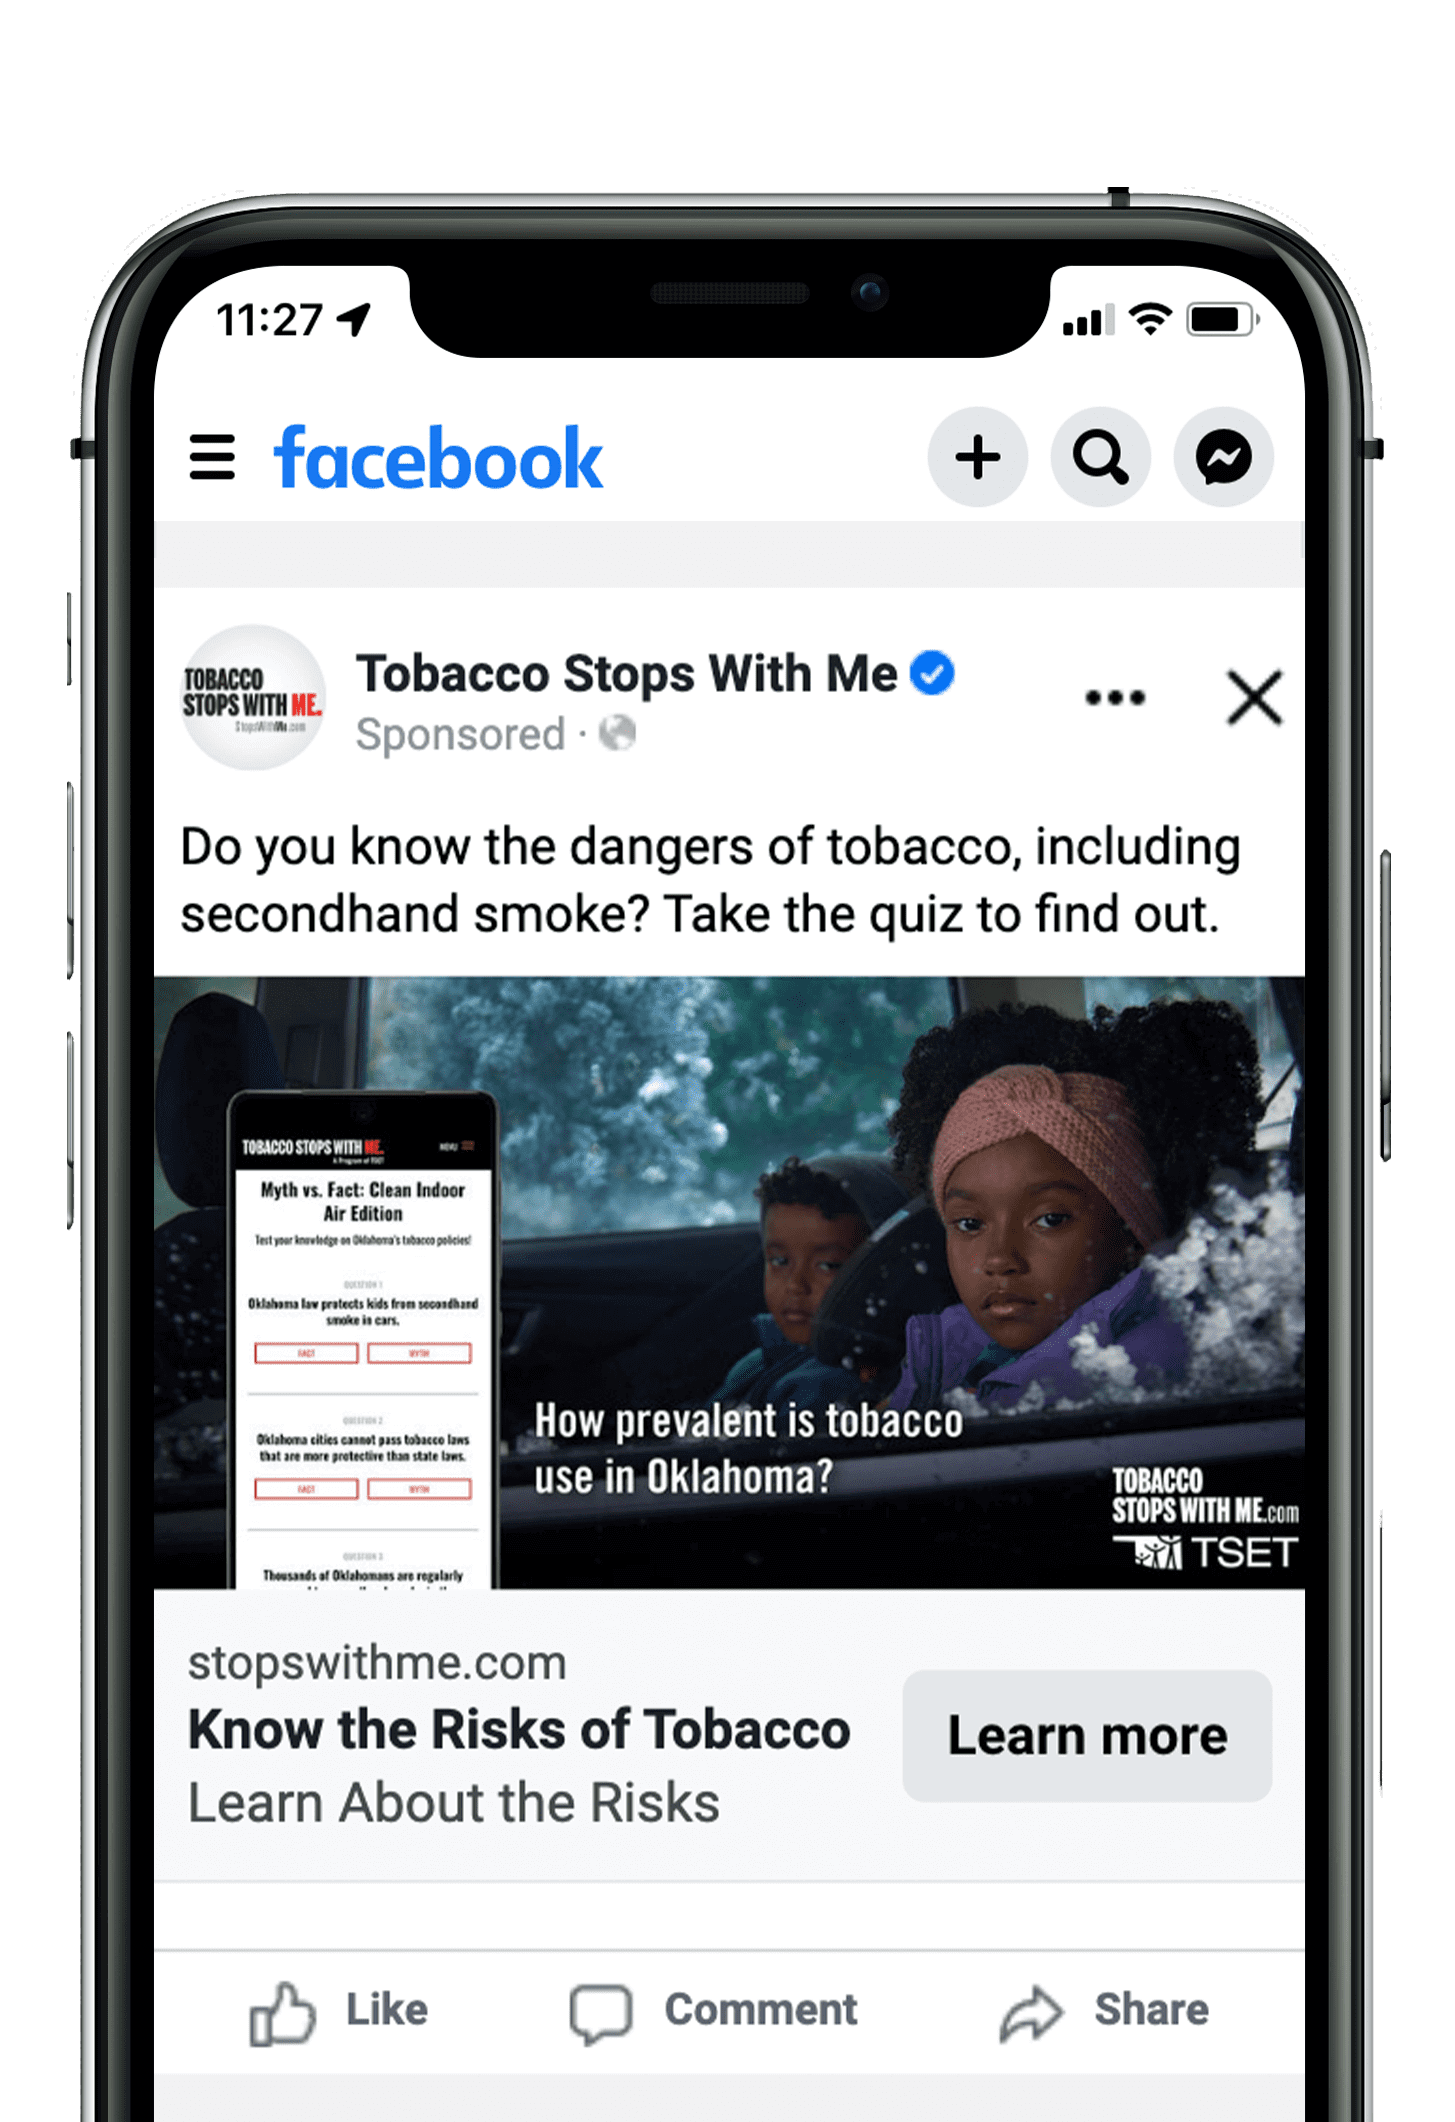 Tobacco stops with me Facebook social media post